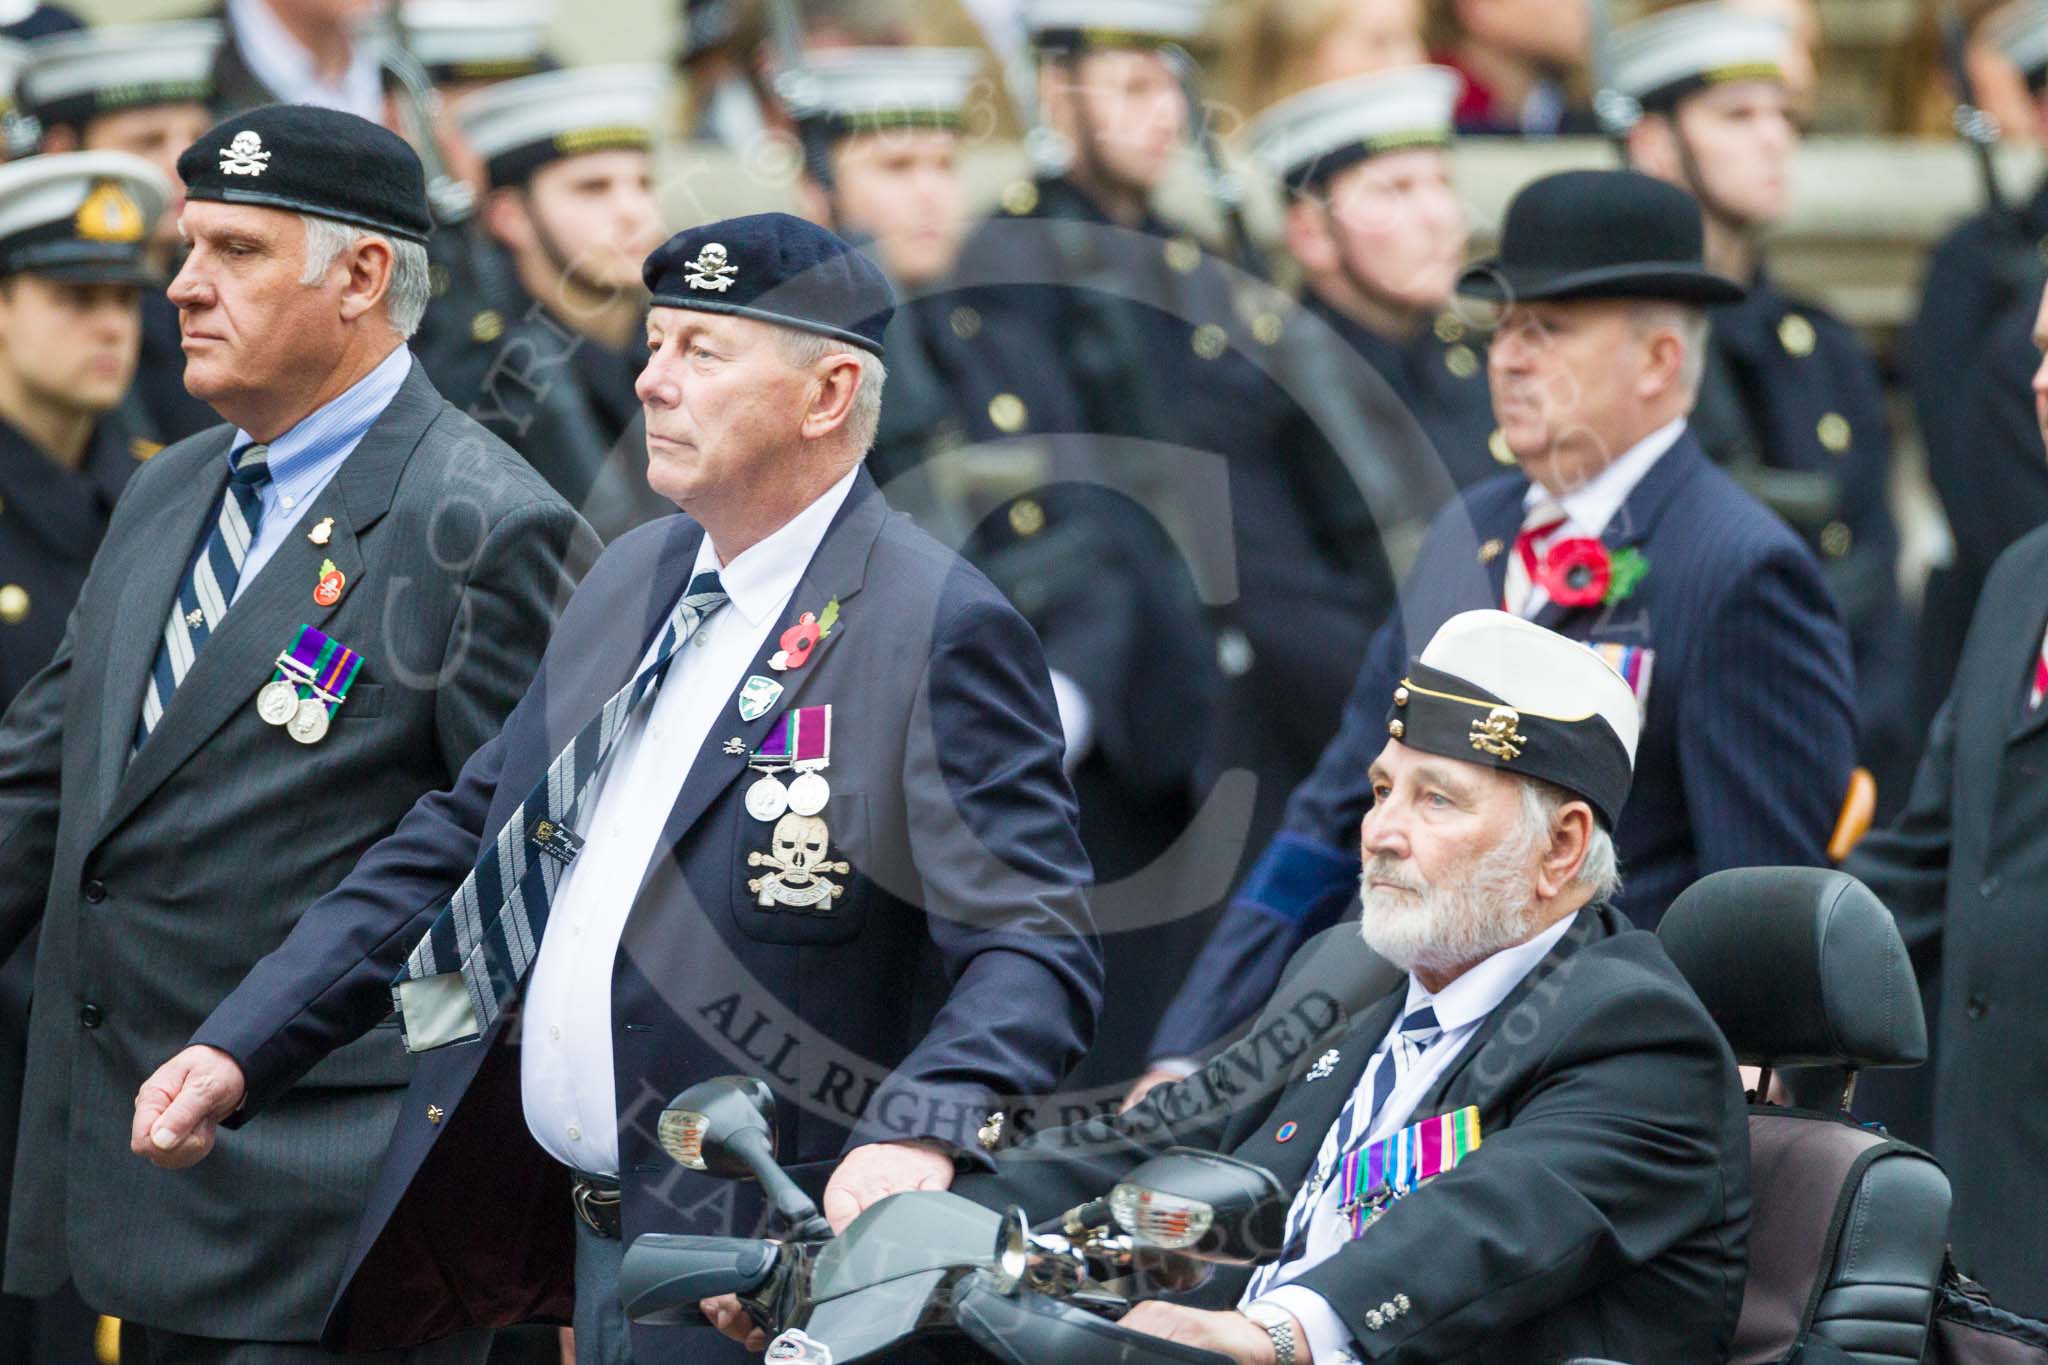 Remembrance Sunday at the Cenotaph 2015: Group B28, The Royal Lancers (New for 2015).
Cenotaph, Whitehall, London SW1,
London,
Greater London,
United Kingdom,
on 08 November 2015 at 11:42, image #220